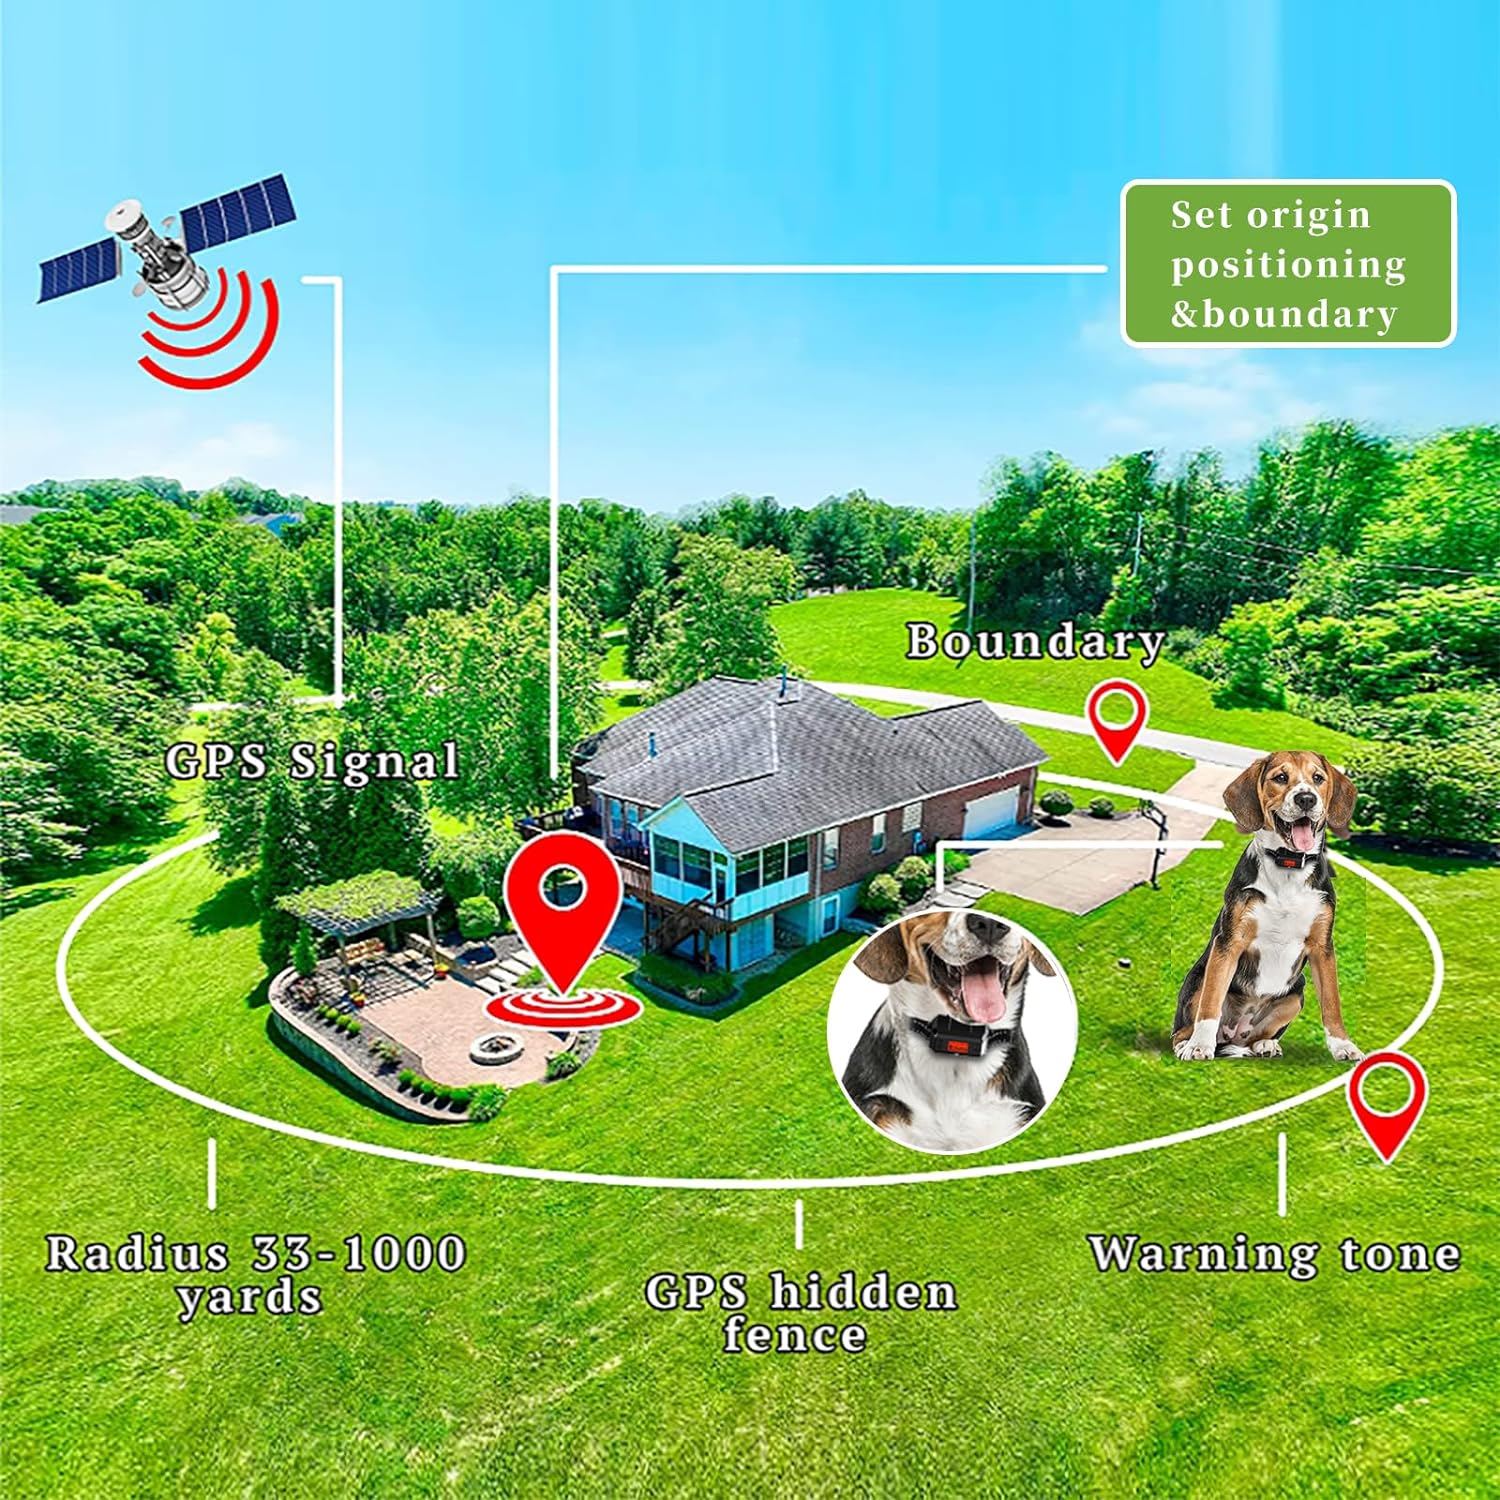 Wireless Electric Fence for Dogs, PETHEY GPS Dog Collar Fence System, IPX7 Waterproof Pet Containment System, Wireless Dog Fence Radius 33-999 Yards, 20-110lb Adjustable Wireless Pet Fence